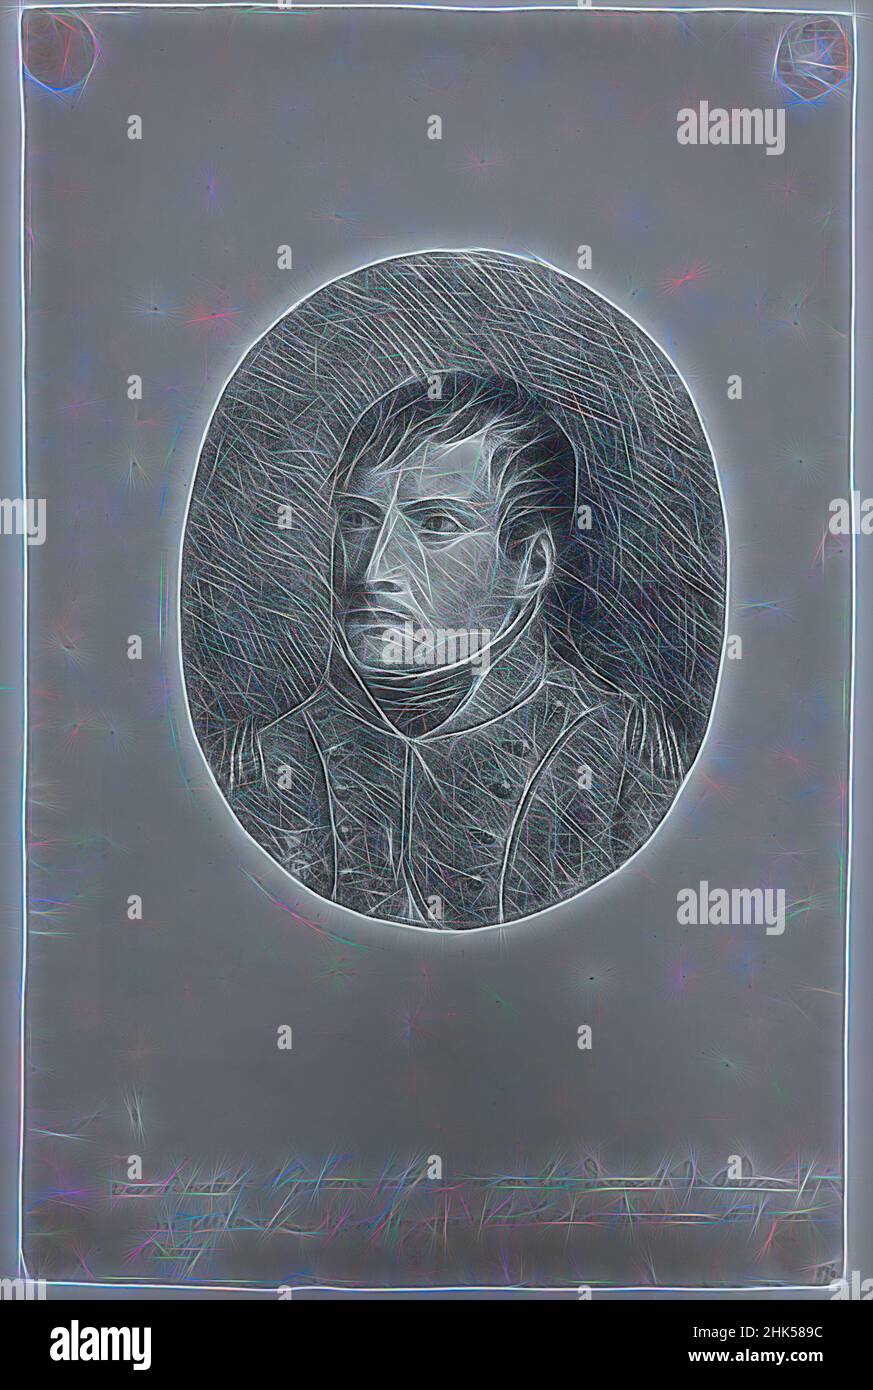 Inspired by Portrait of the Emporer Napoleon I, Lithograph on cream wove paper, ca. 1805, composition, oval: 9 13/16 x 8 1/16 in., 25 x 20.5 cm, Reimagined by Artotop. Classic art reinvented with a modern twist. Design of warm cheerful glowing of brightness and light ray radiance. Photography inspired by surrealism and futurism, embracing dynamic energy of modern technology, movement, speed and revolutionize culture Stock Photo